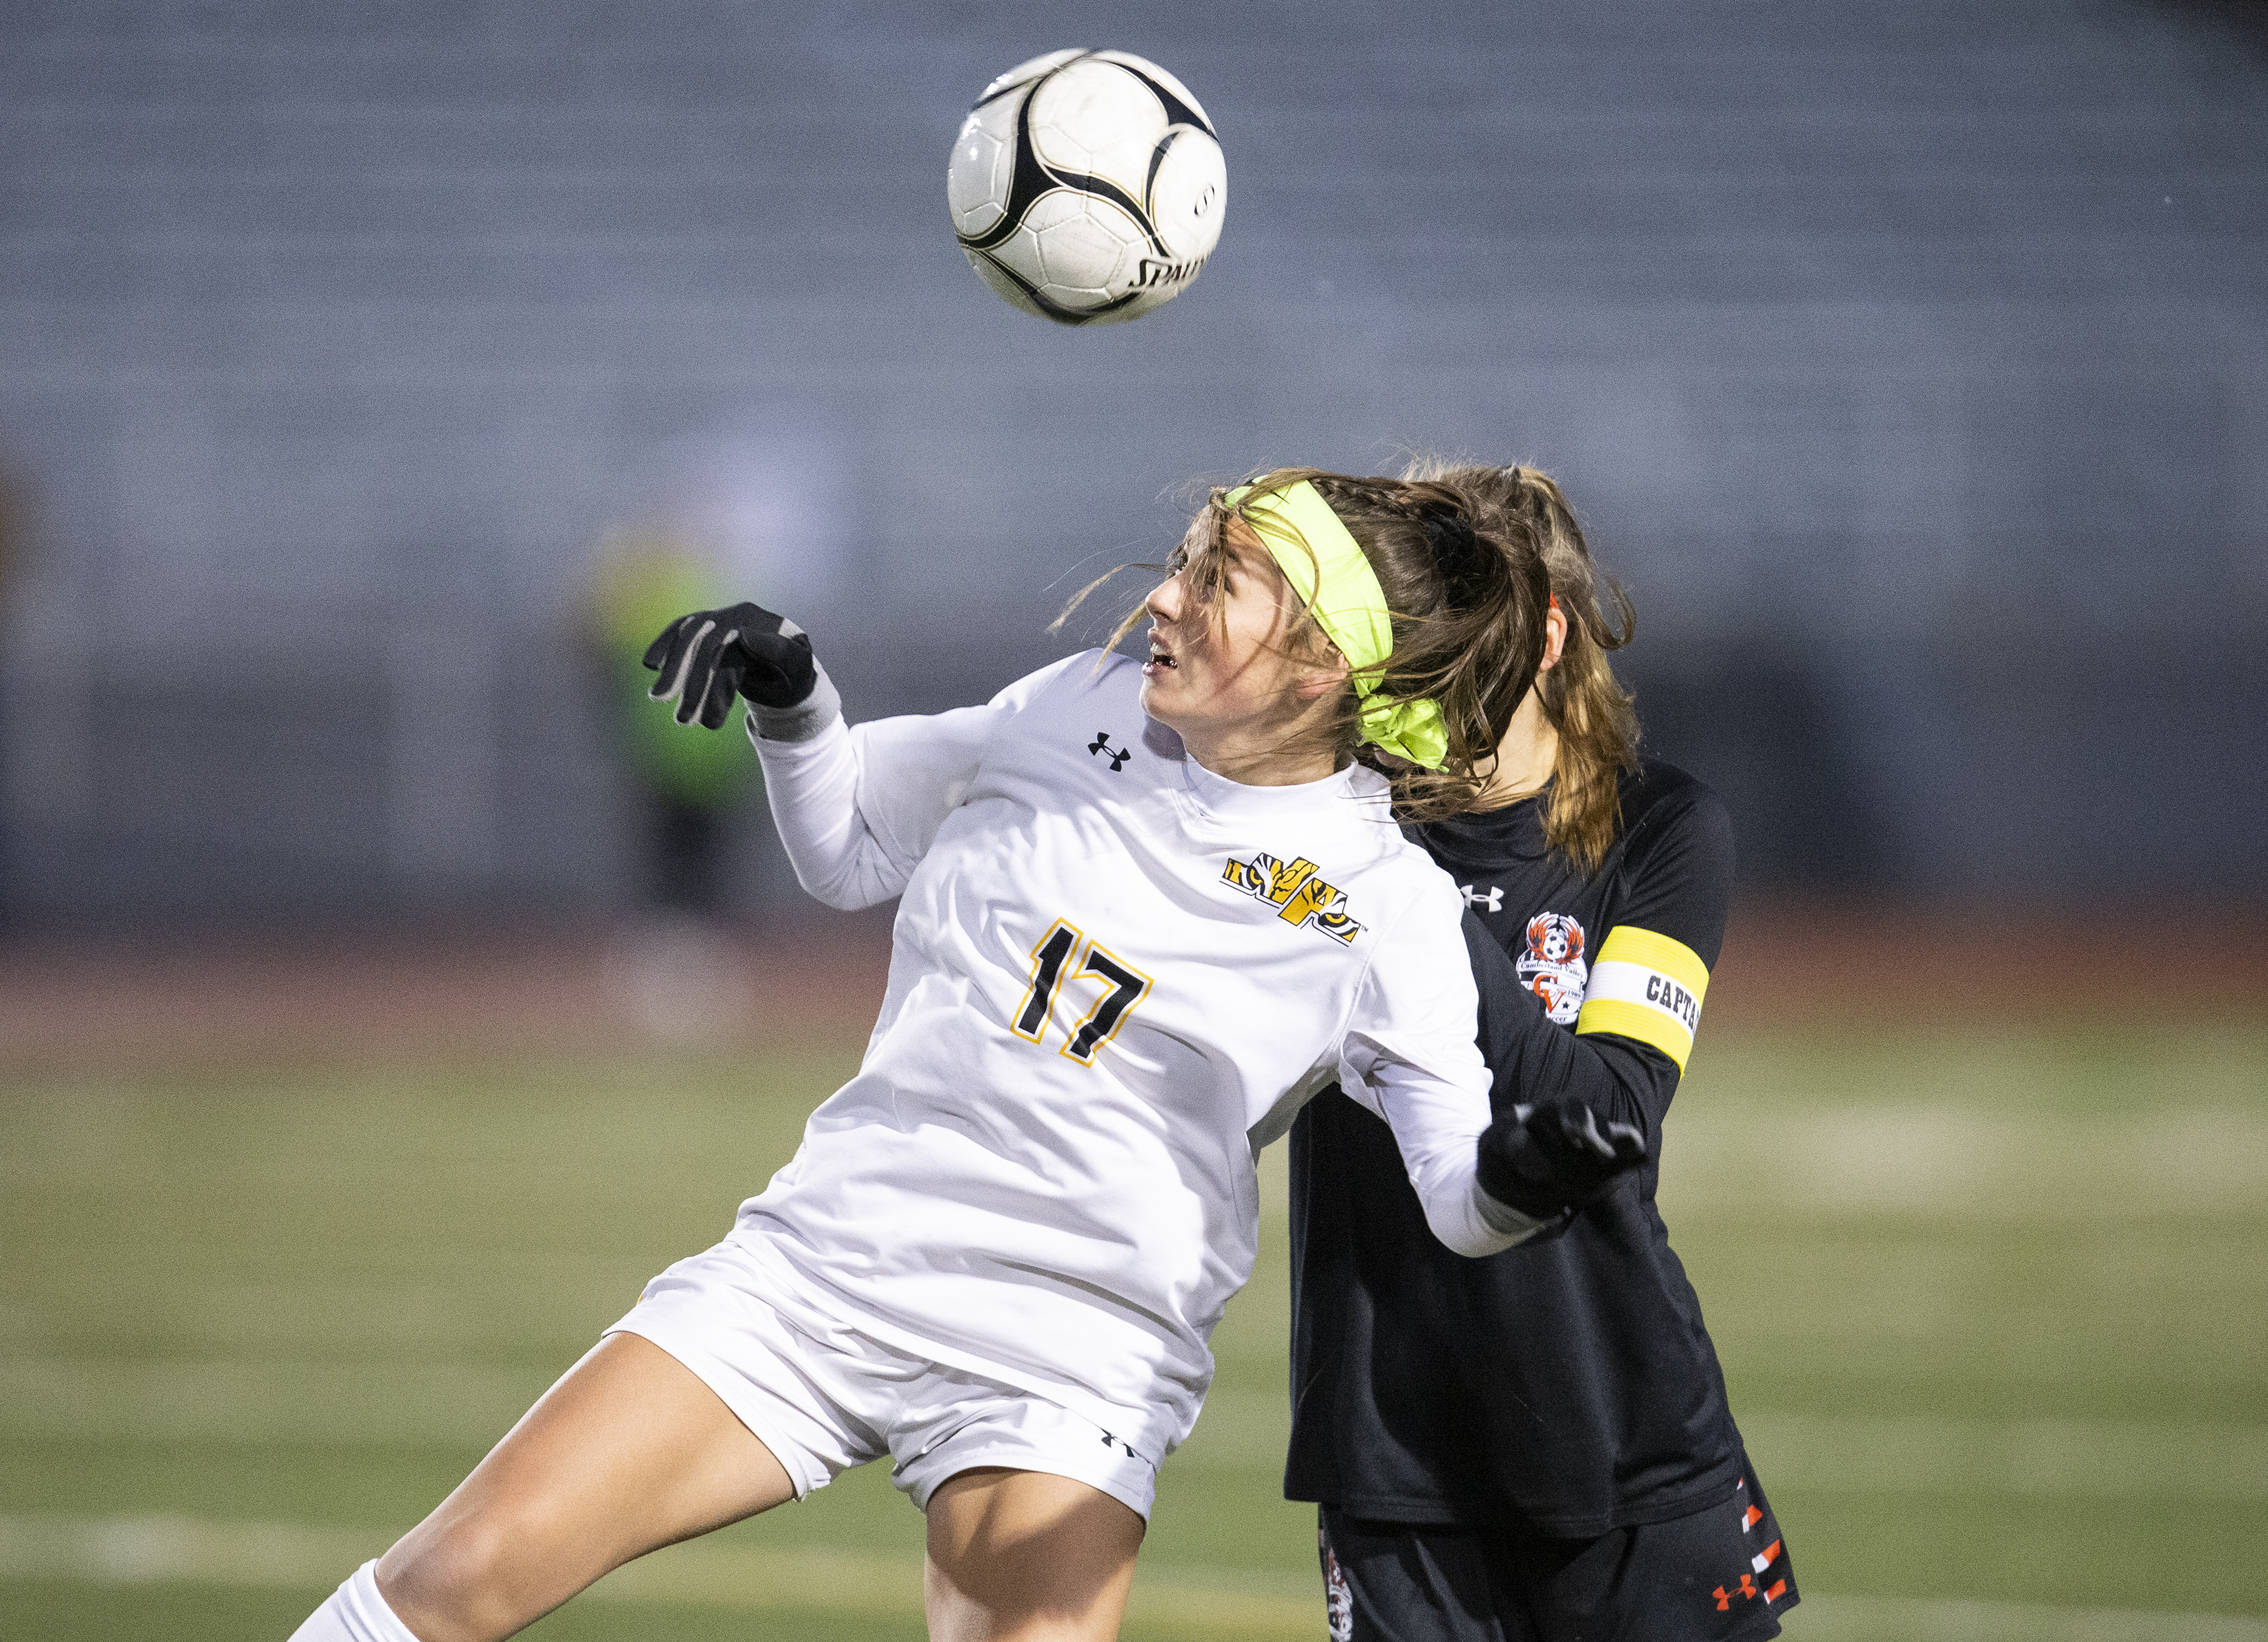 Sarah Schupansky Becomes First Pitt Soccer Player Named All-ACC First Team  - North Allegheny Sports Network